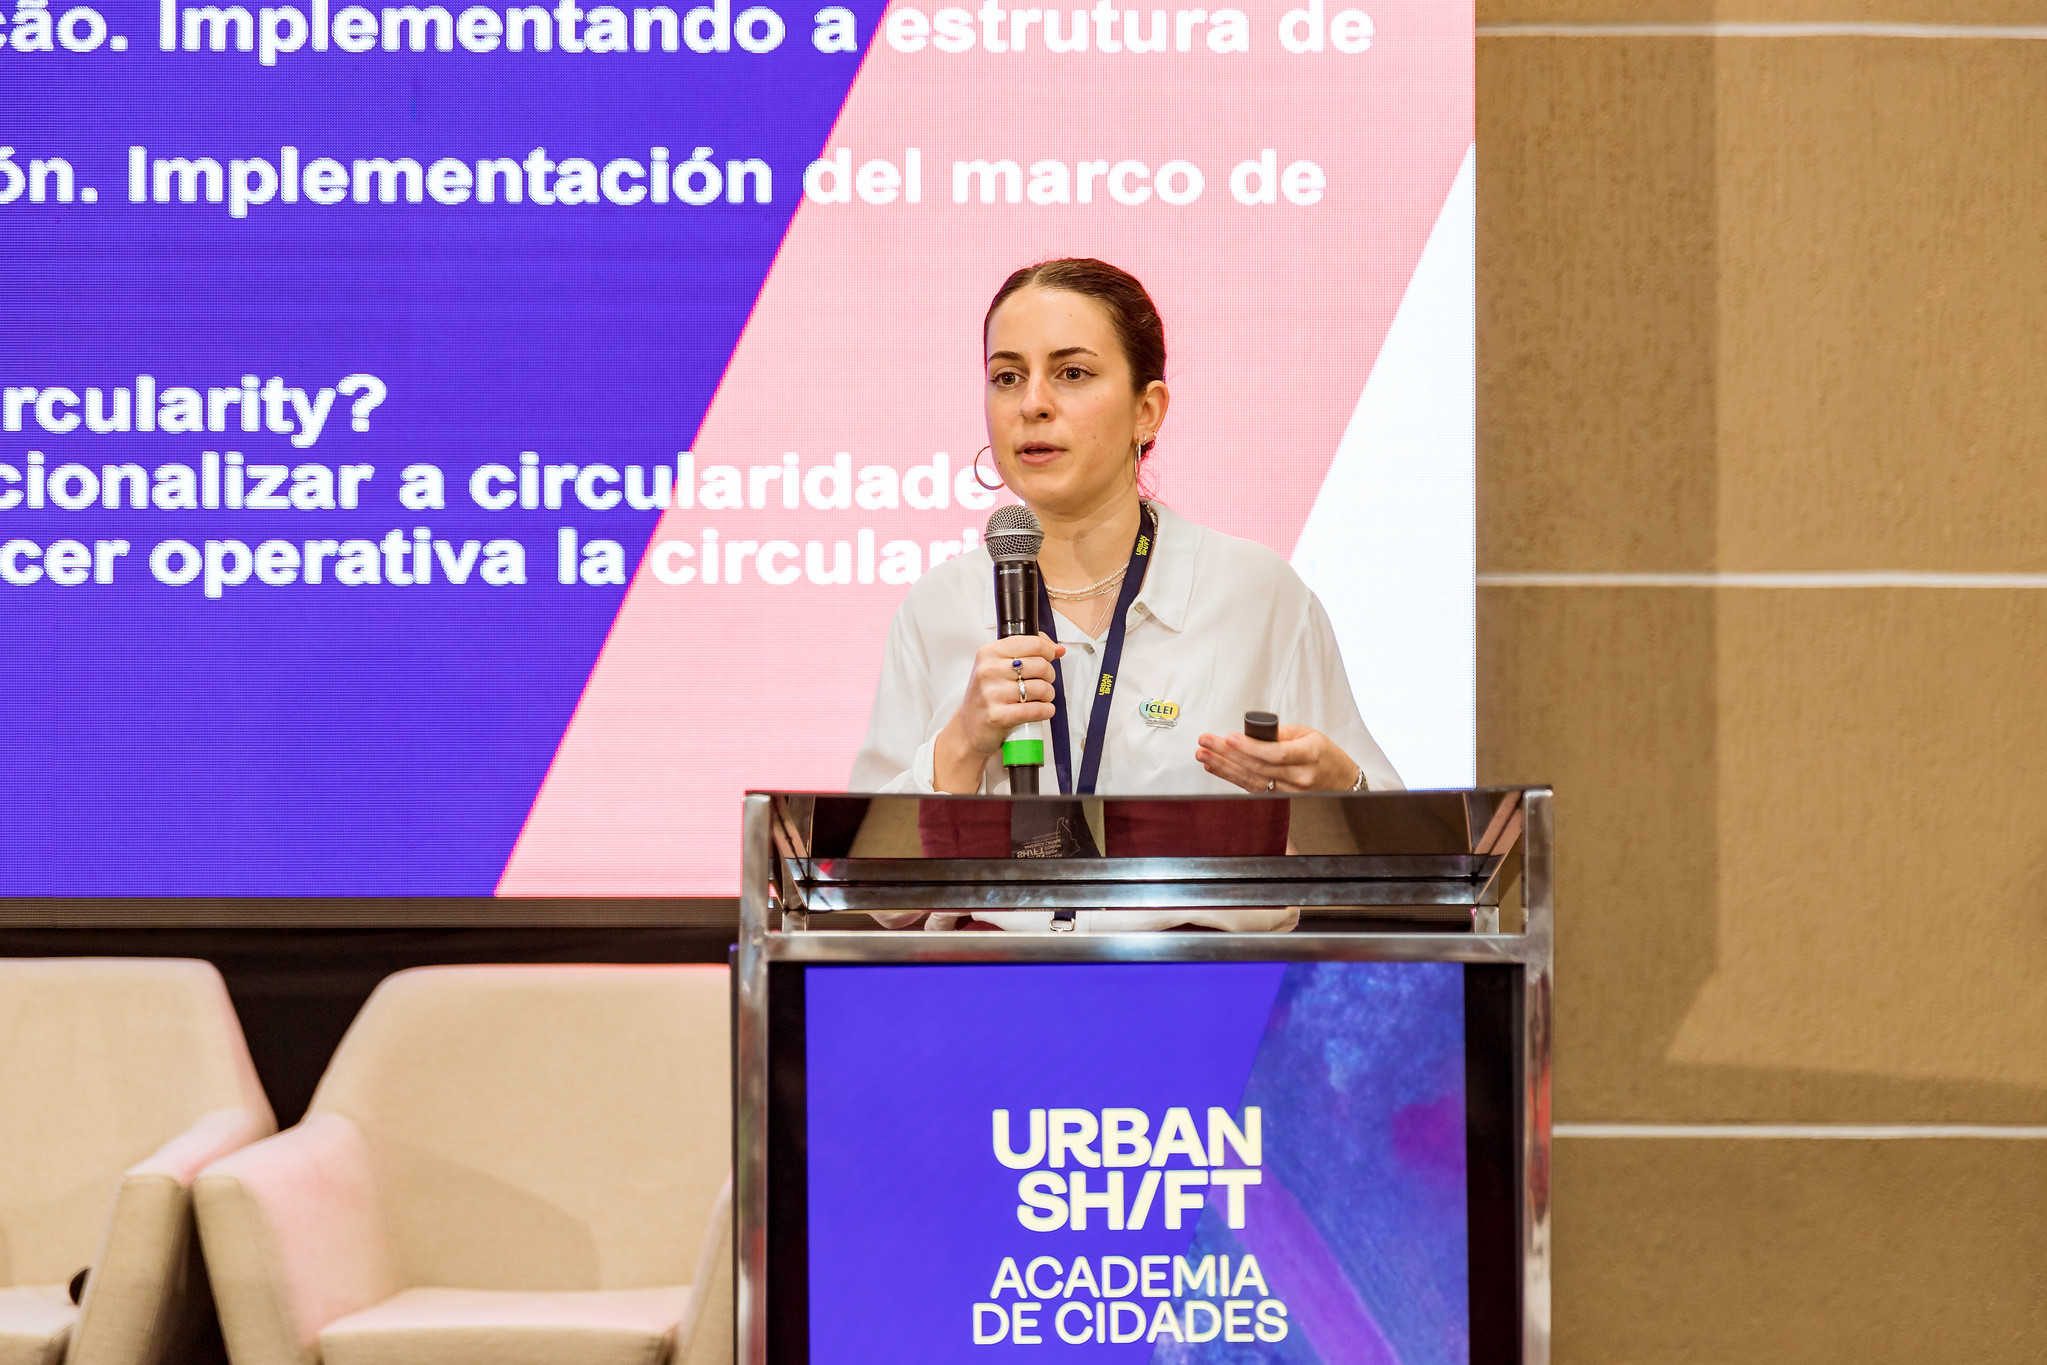 maria alonso martinez of ICLEI presenting during the Forum